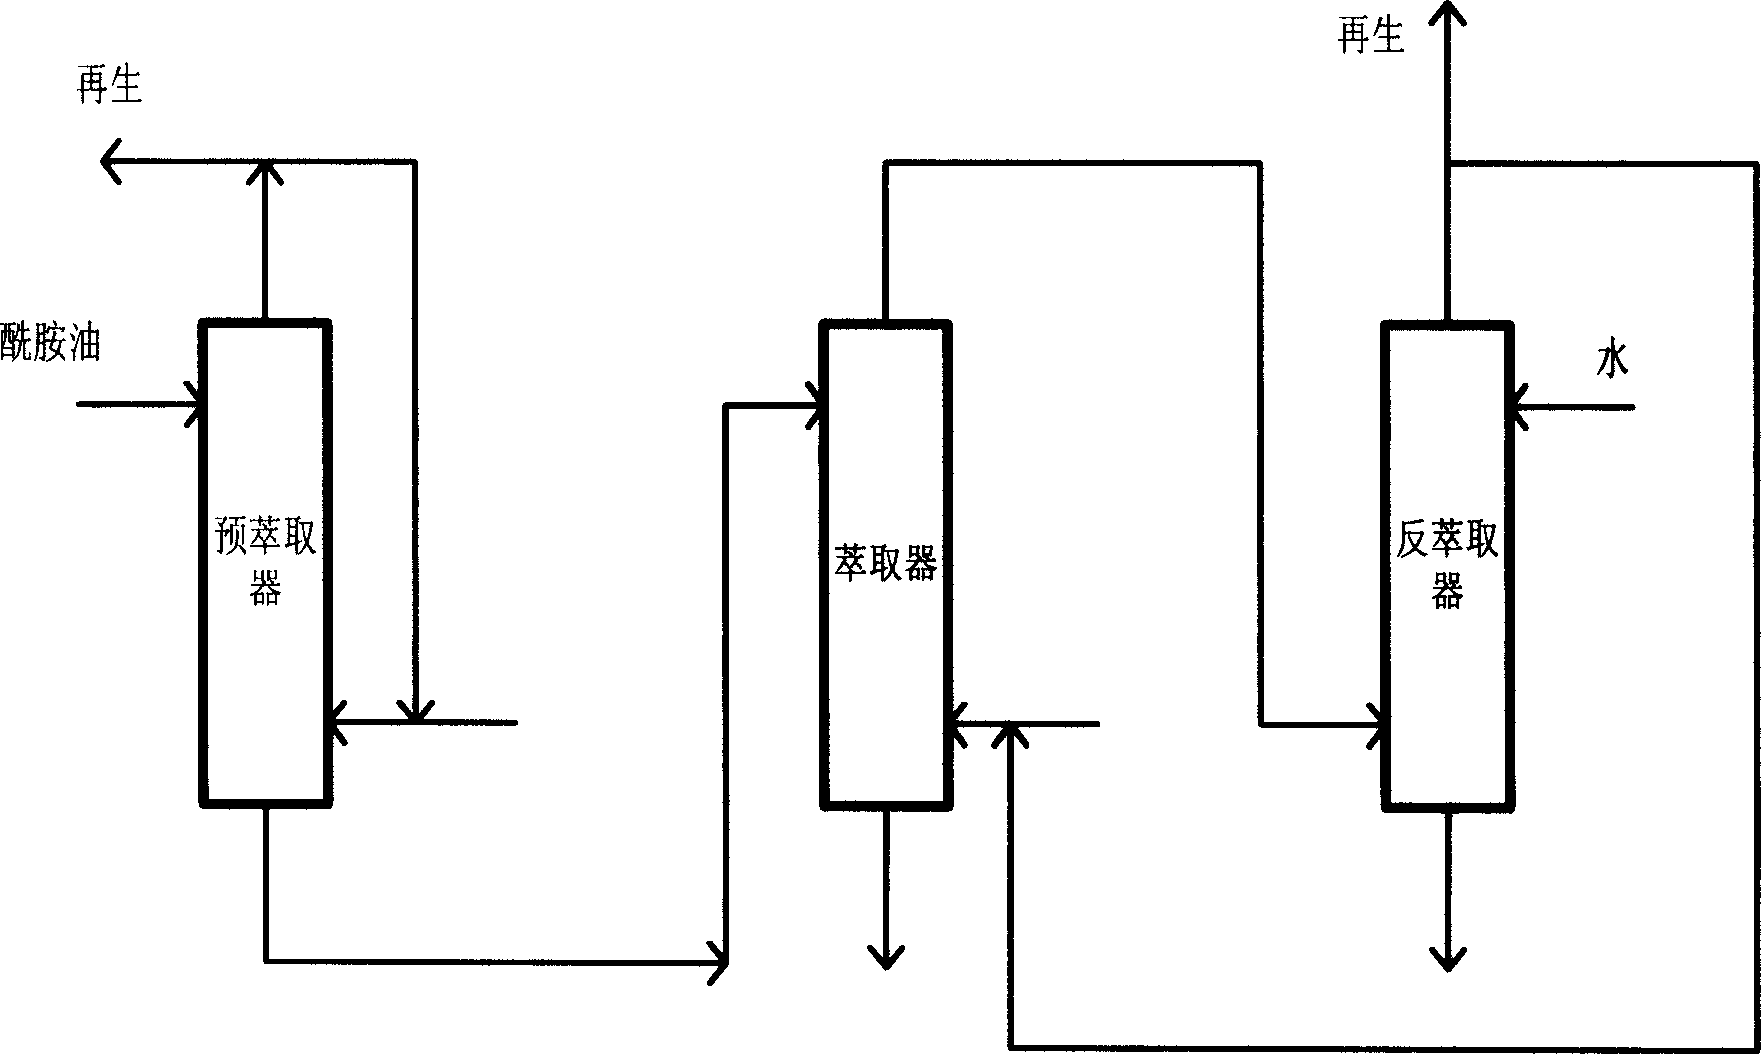 Process for extracting and separating caprolactam from amide oil